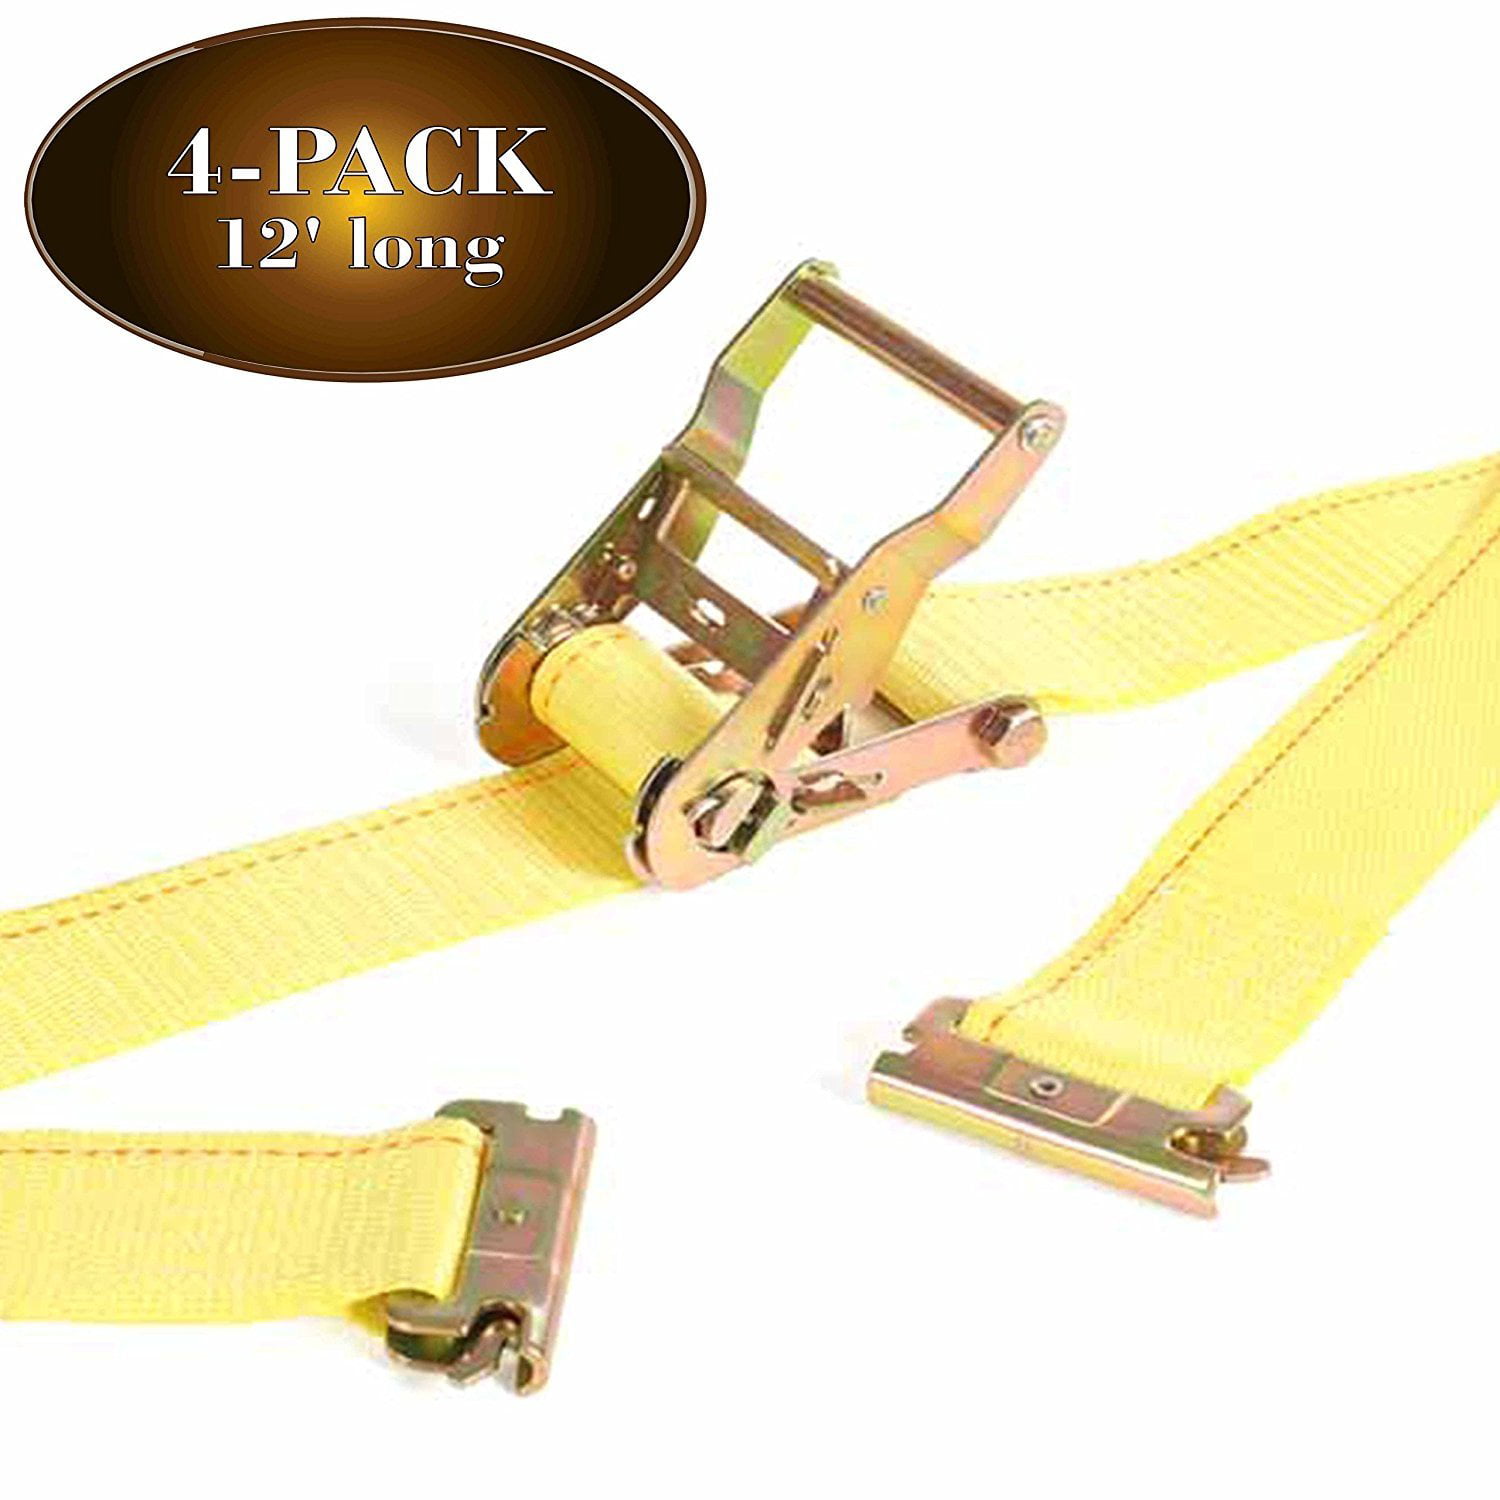 ETrack Spring Fittings Durable Cam Buckle Cargo TieDown Tie Down Motorcycles Four 2 x 16 E Track Strap Trailer Loads by DC Cargo Heavy Duty Grey Polyester Tie-Down Cam Strap